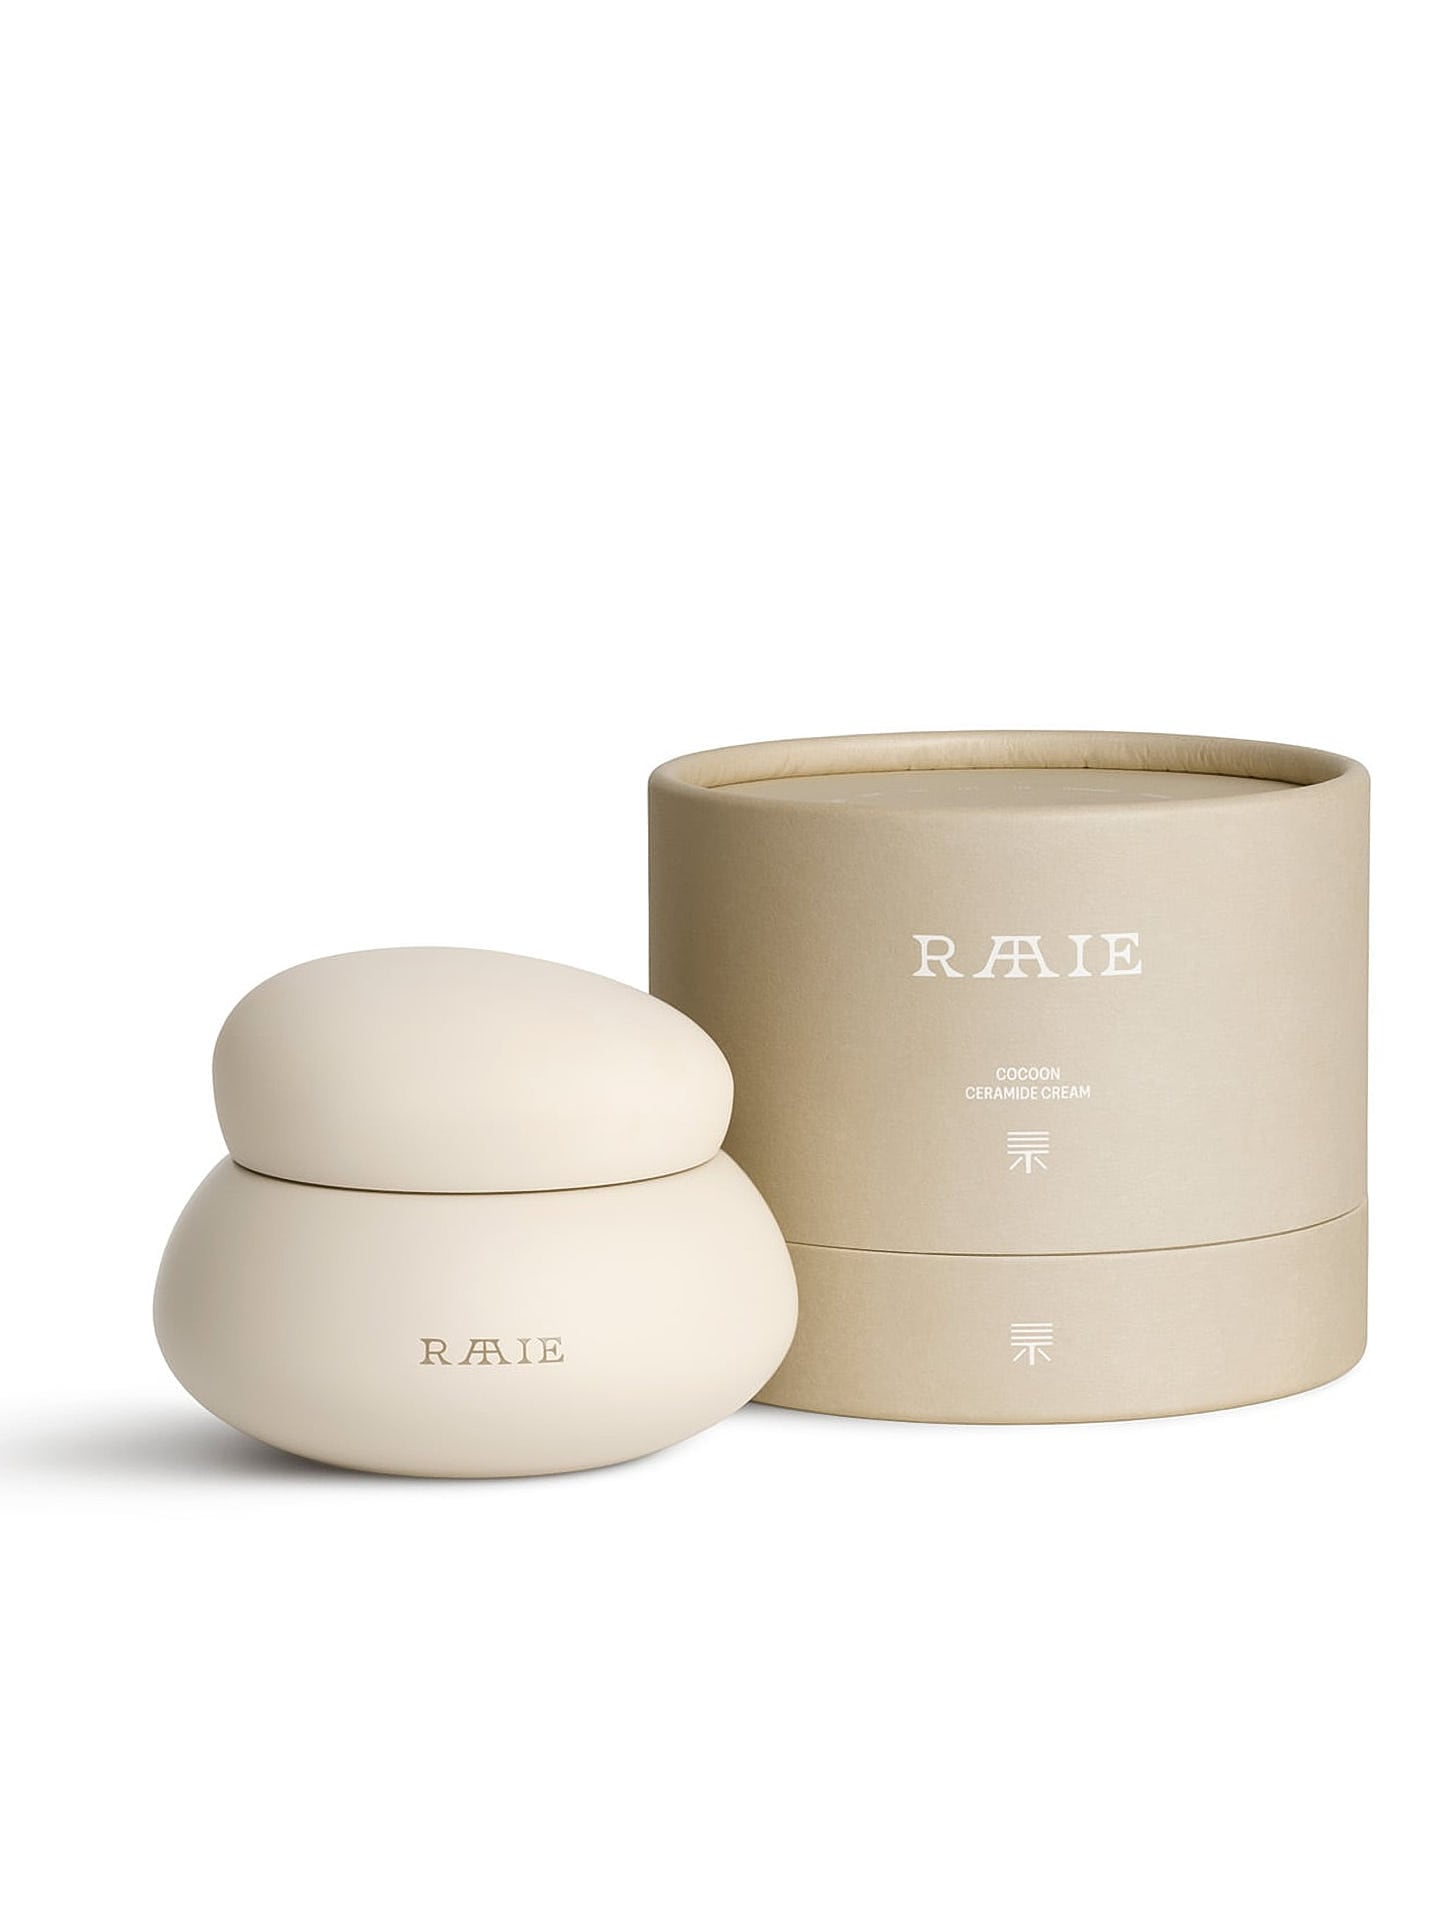 A round, beige container labeled "RAAIE" sits next to its matching cylindrical box. The box features the brand name "RAAIE" and minimal text, indicating it houses a hydrating moisturizer called Cocoon Ceramide Cream designed to reinforce the skin barrier with essential ceramides.